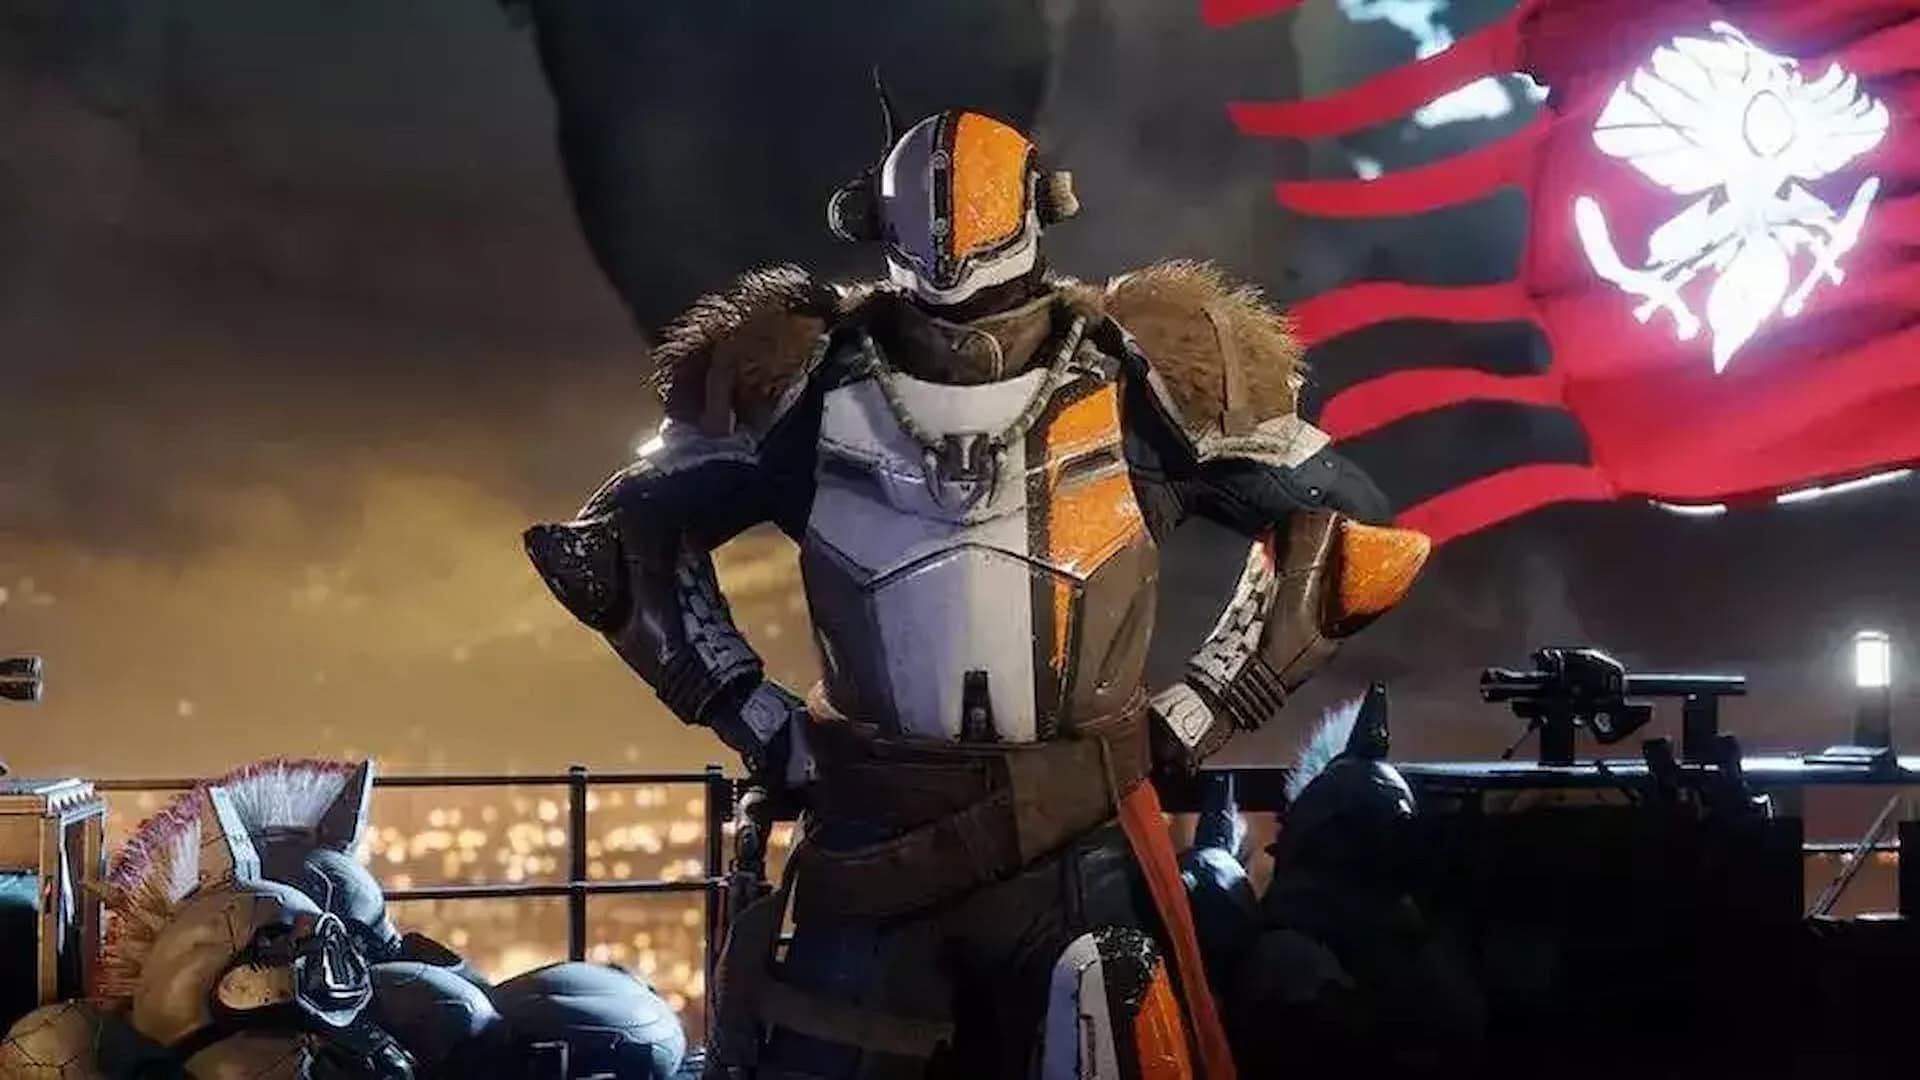 Lord Shaxx handles the Crucible in Destiny 2 (Image via Bungie)